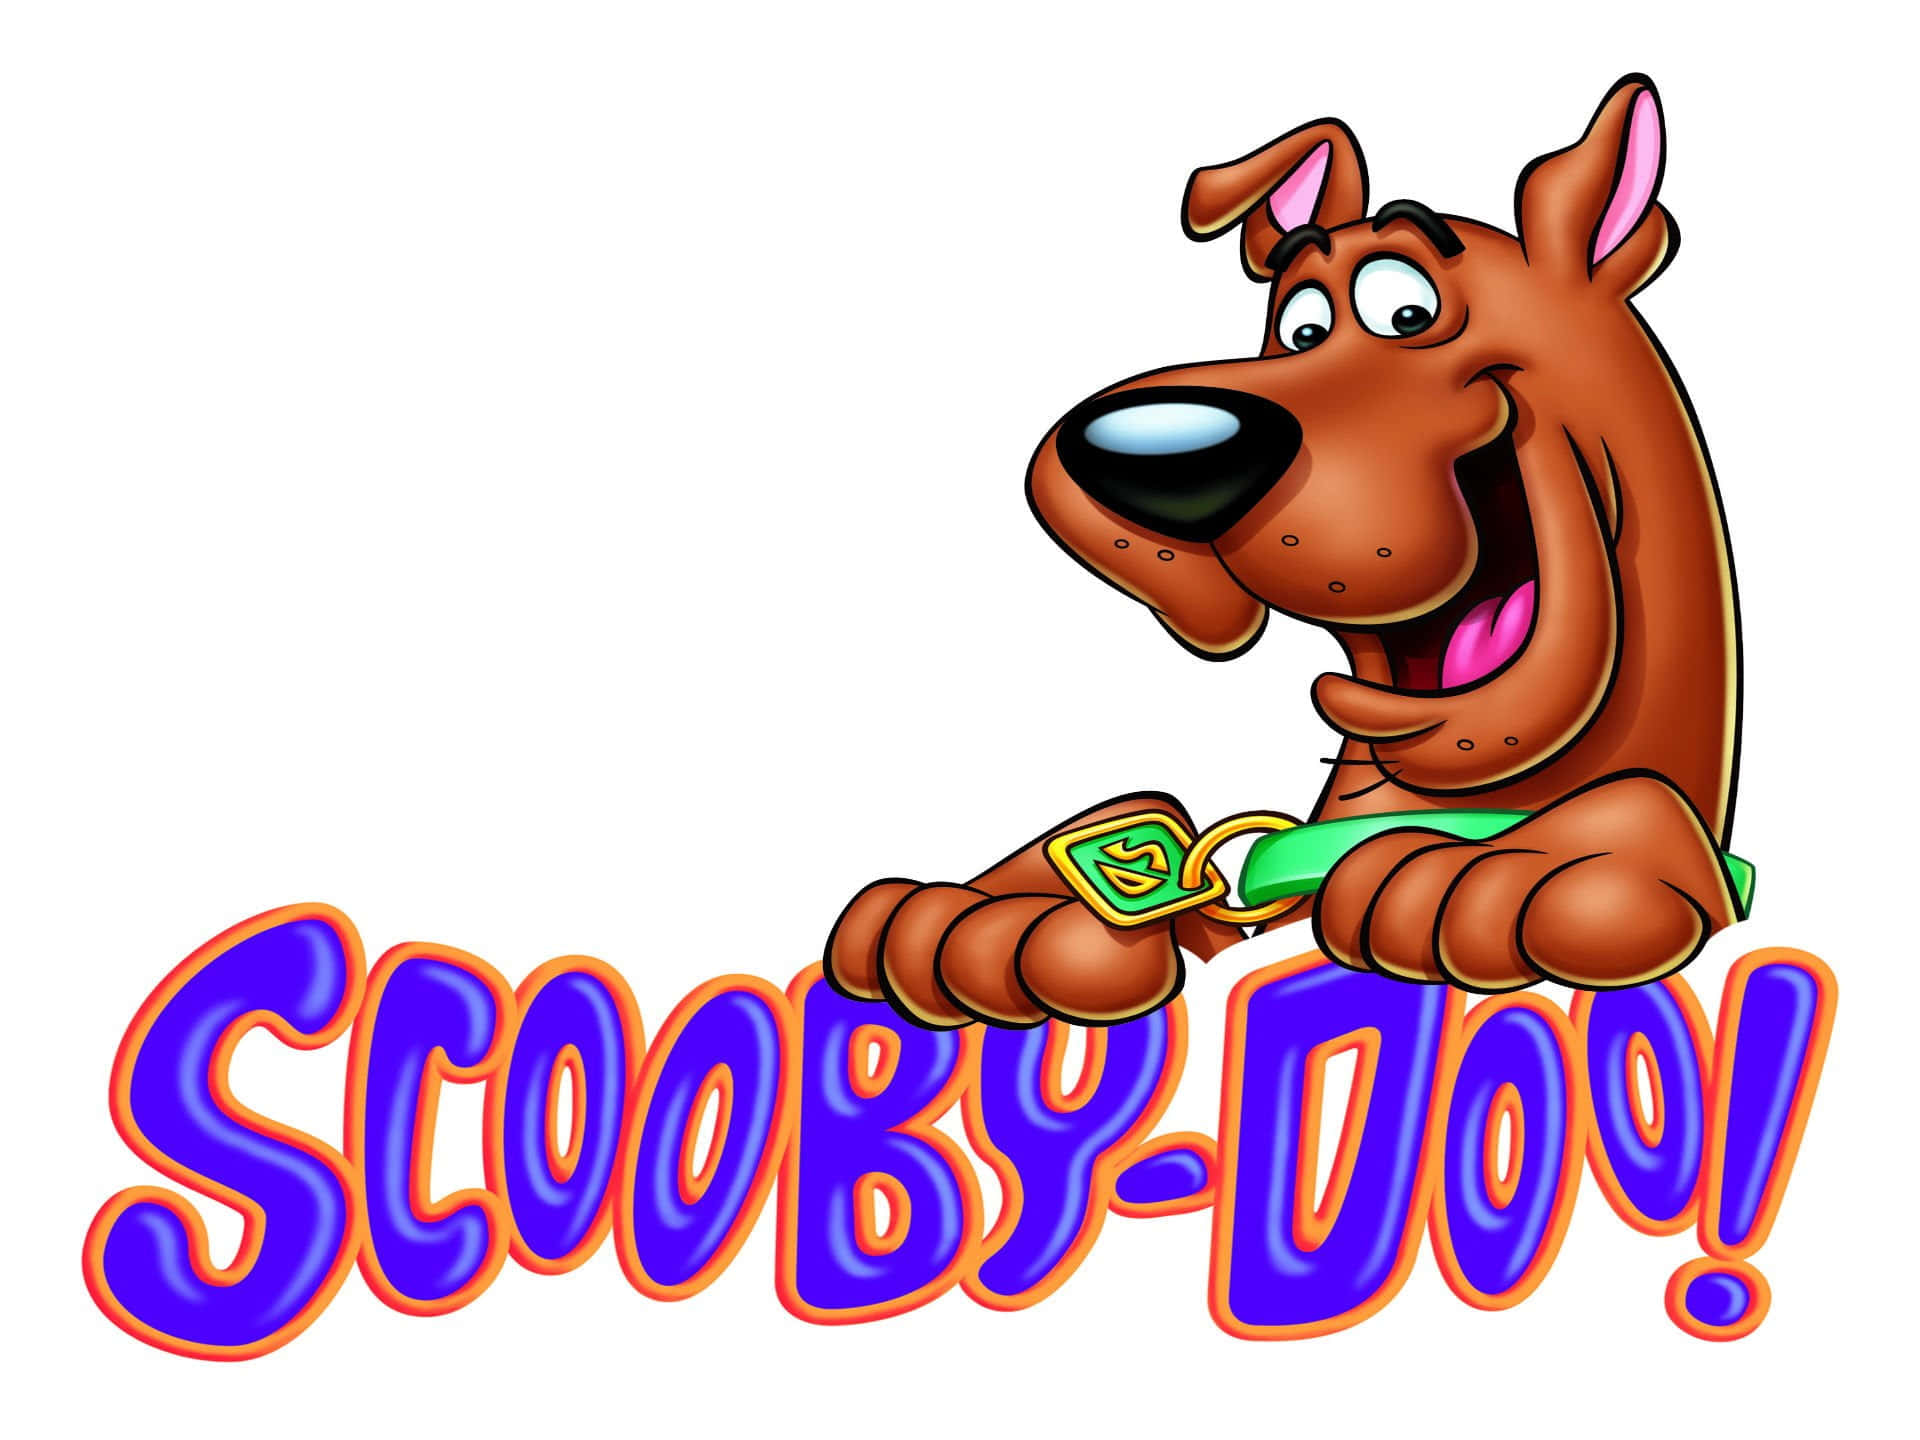 A day of laughs with Scooby and the gang